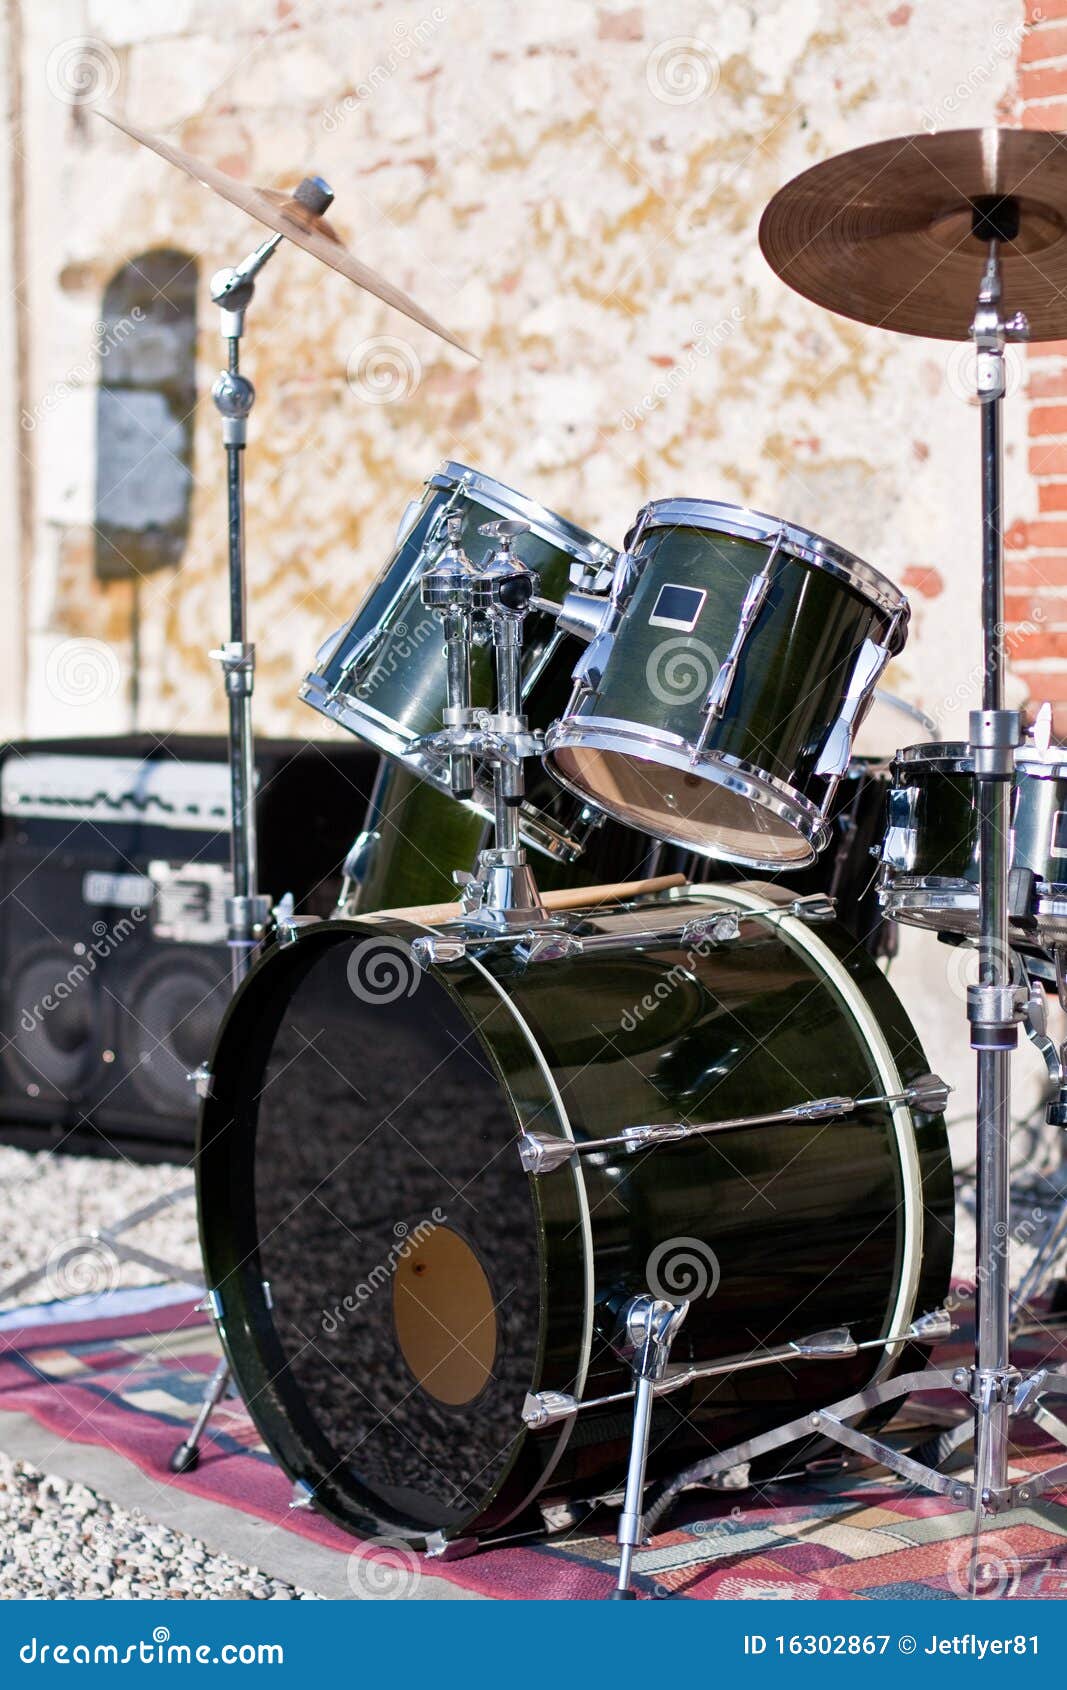 Rock Band Drum Kit Outdoors Royalty Free Stock Photography - Image